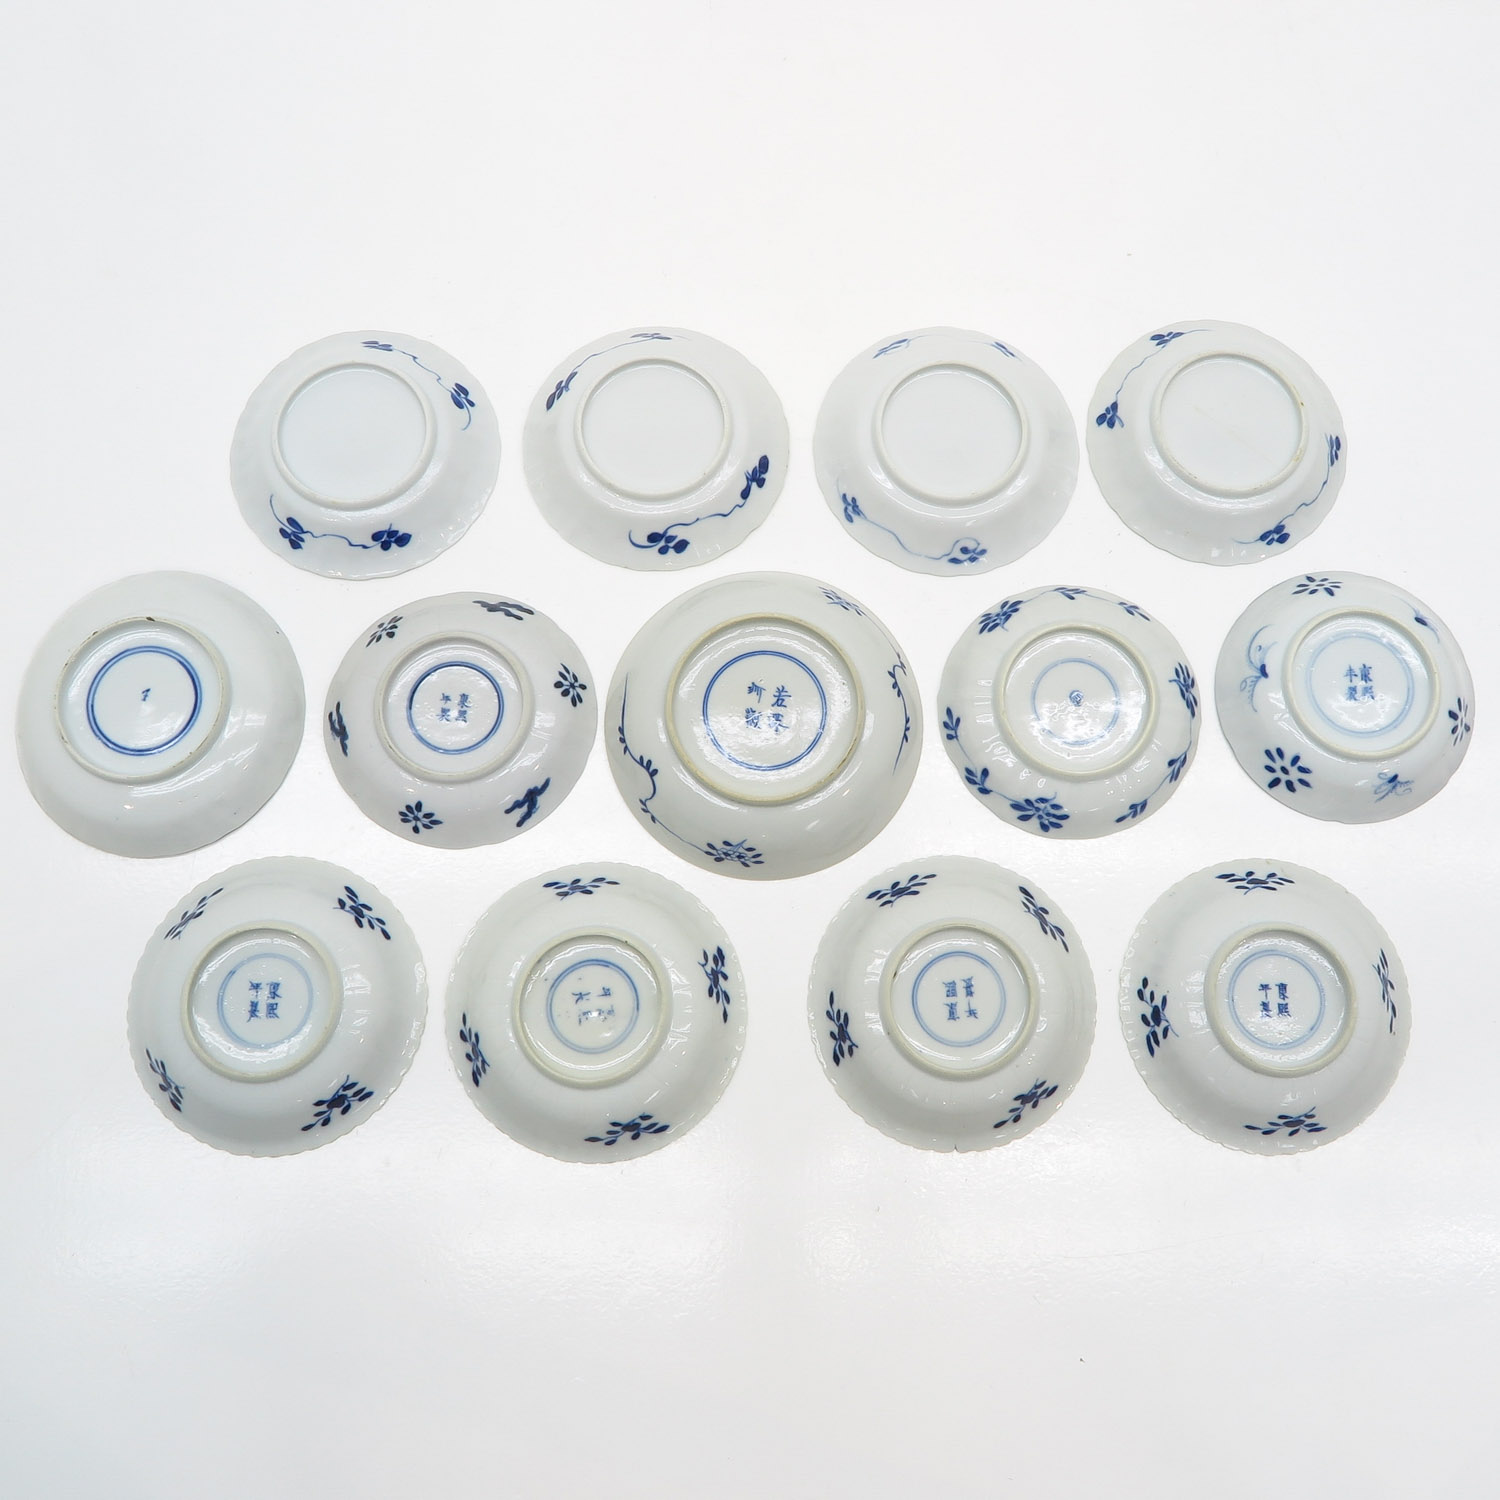 Lot of 13 China Porcelain Saucers - Image 2 of 2